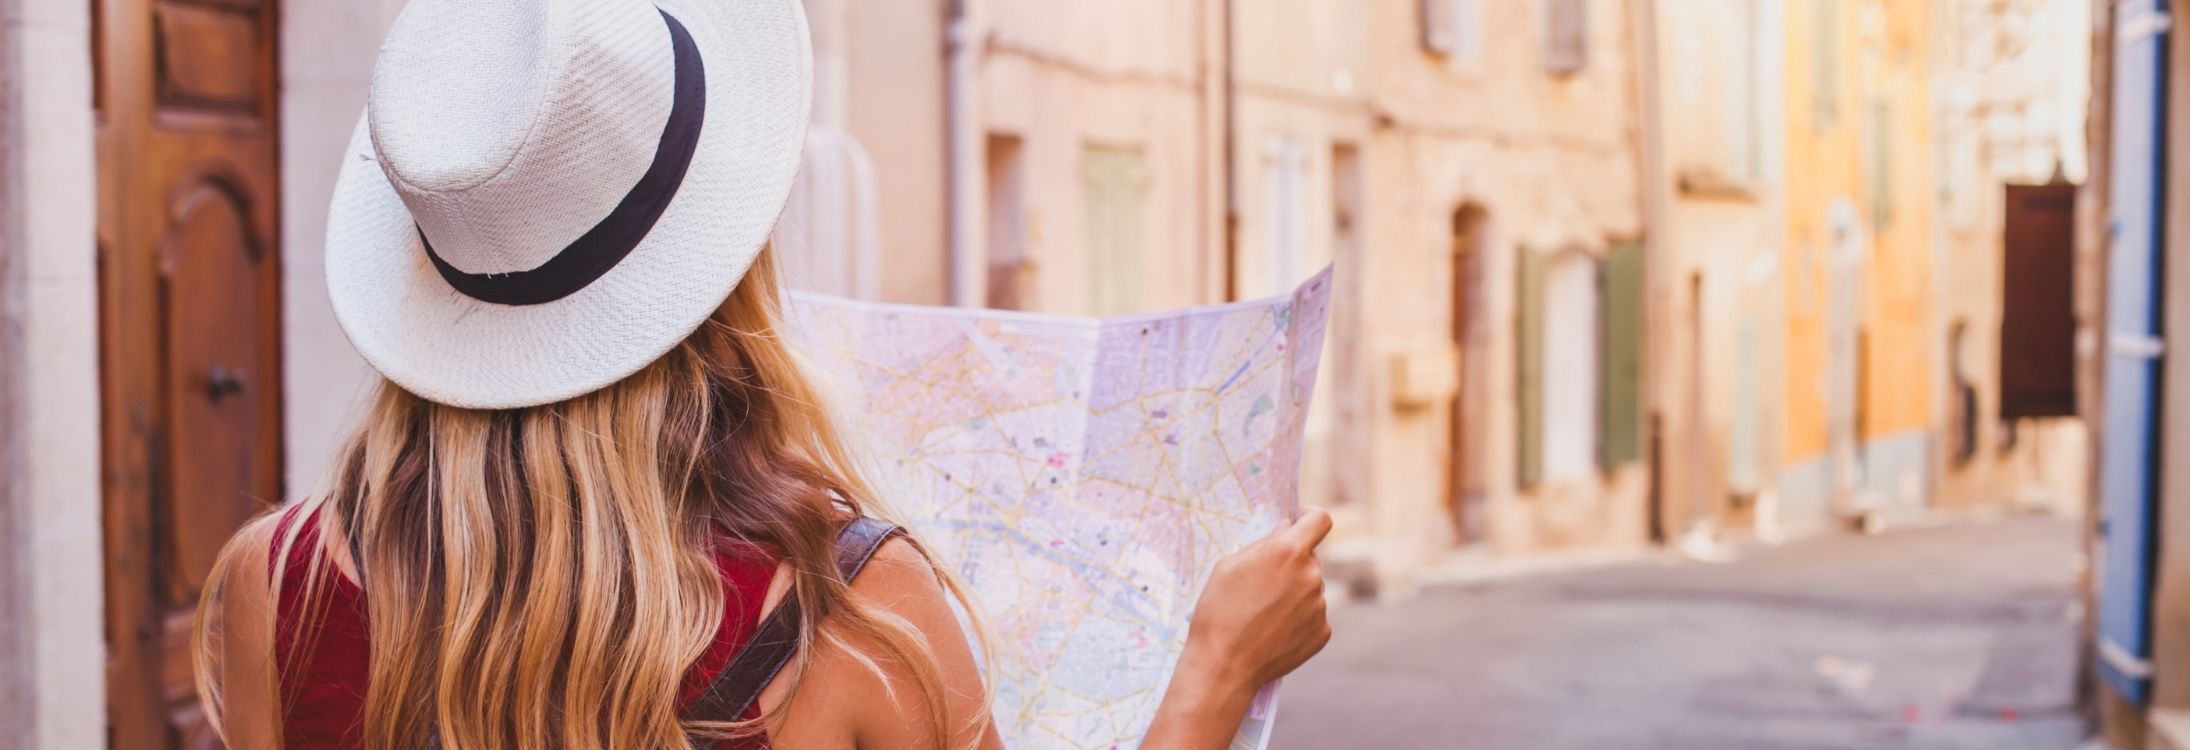 7 Tips For Solo Female Travellers